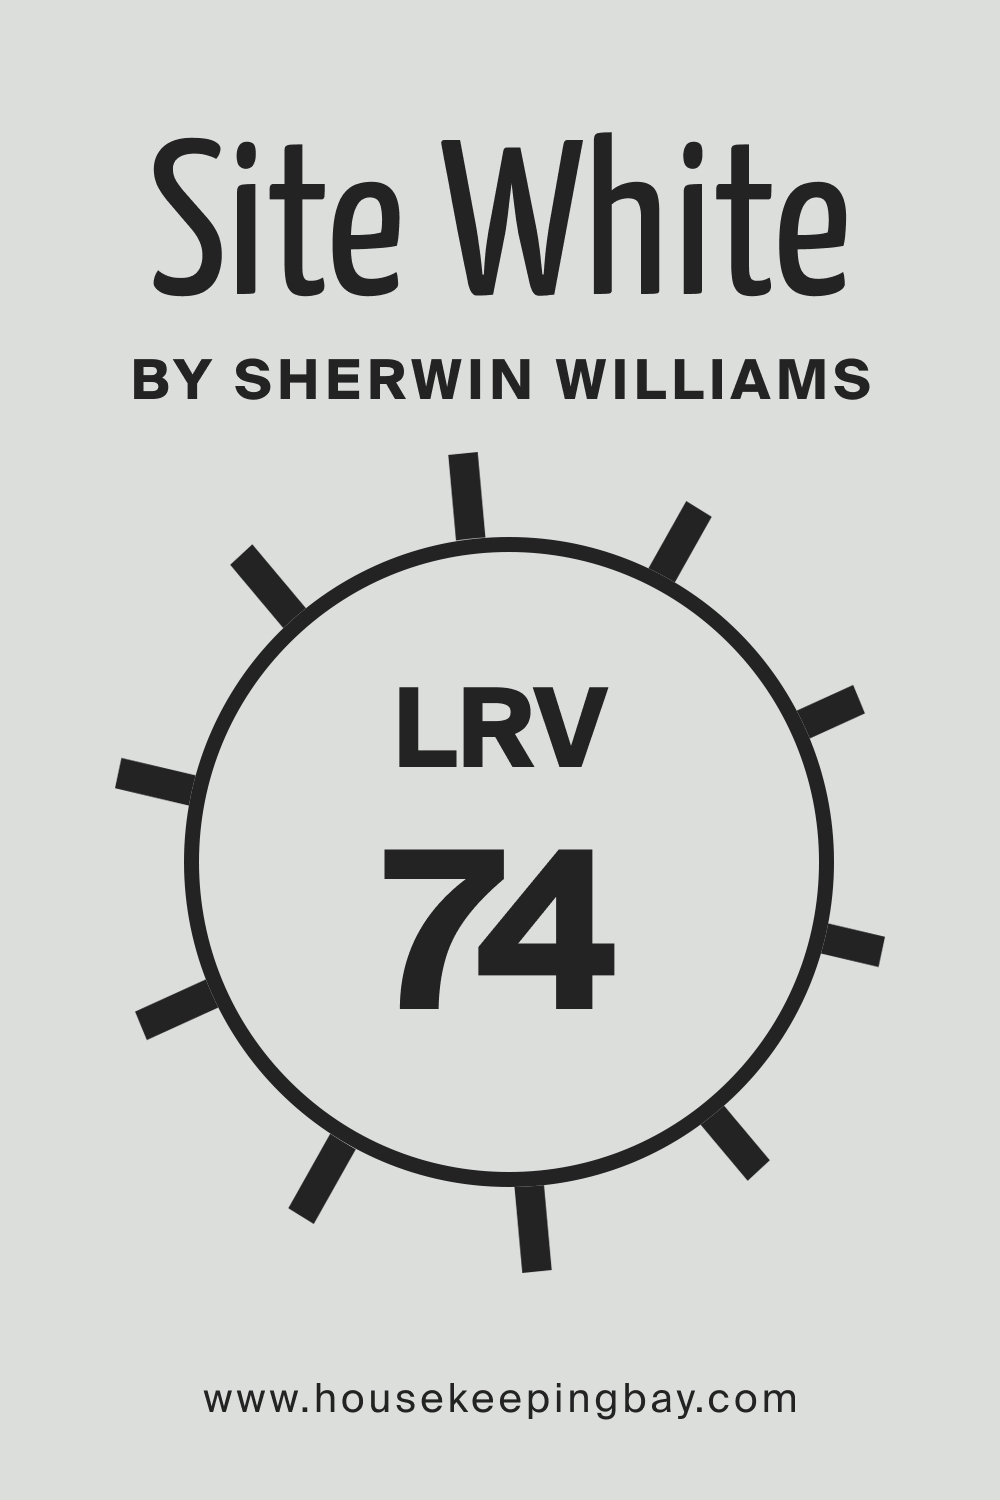 SW Site White by Sherwin Williams. LRV – 74